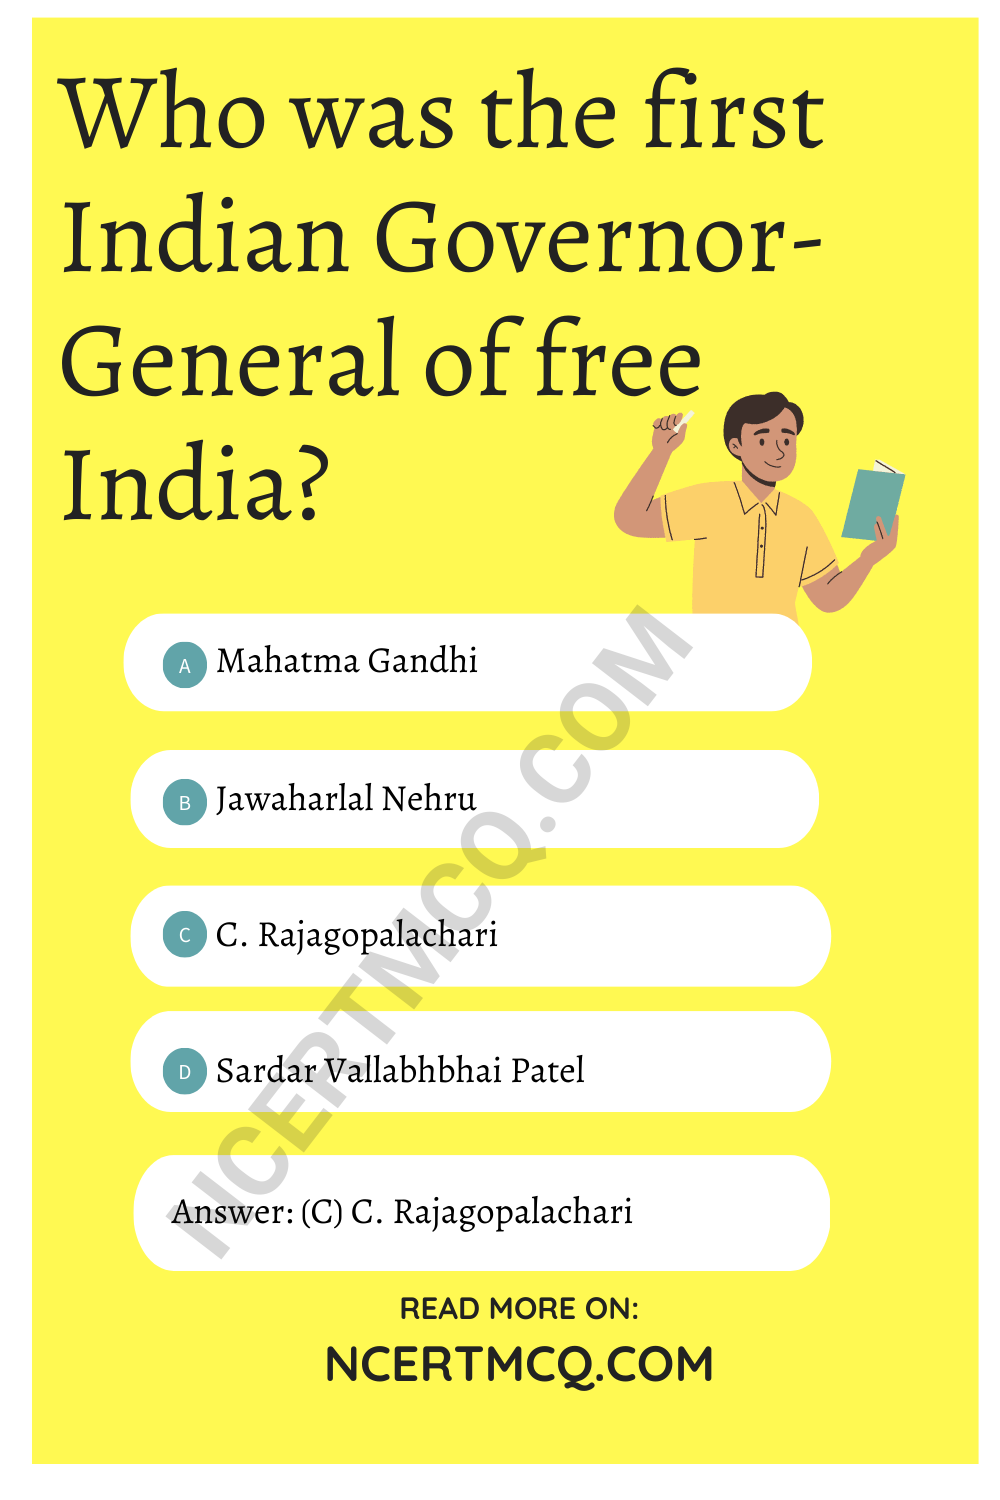 Who was the first Prime Minister of Free India